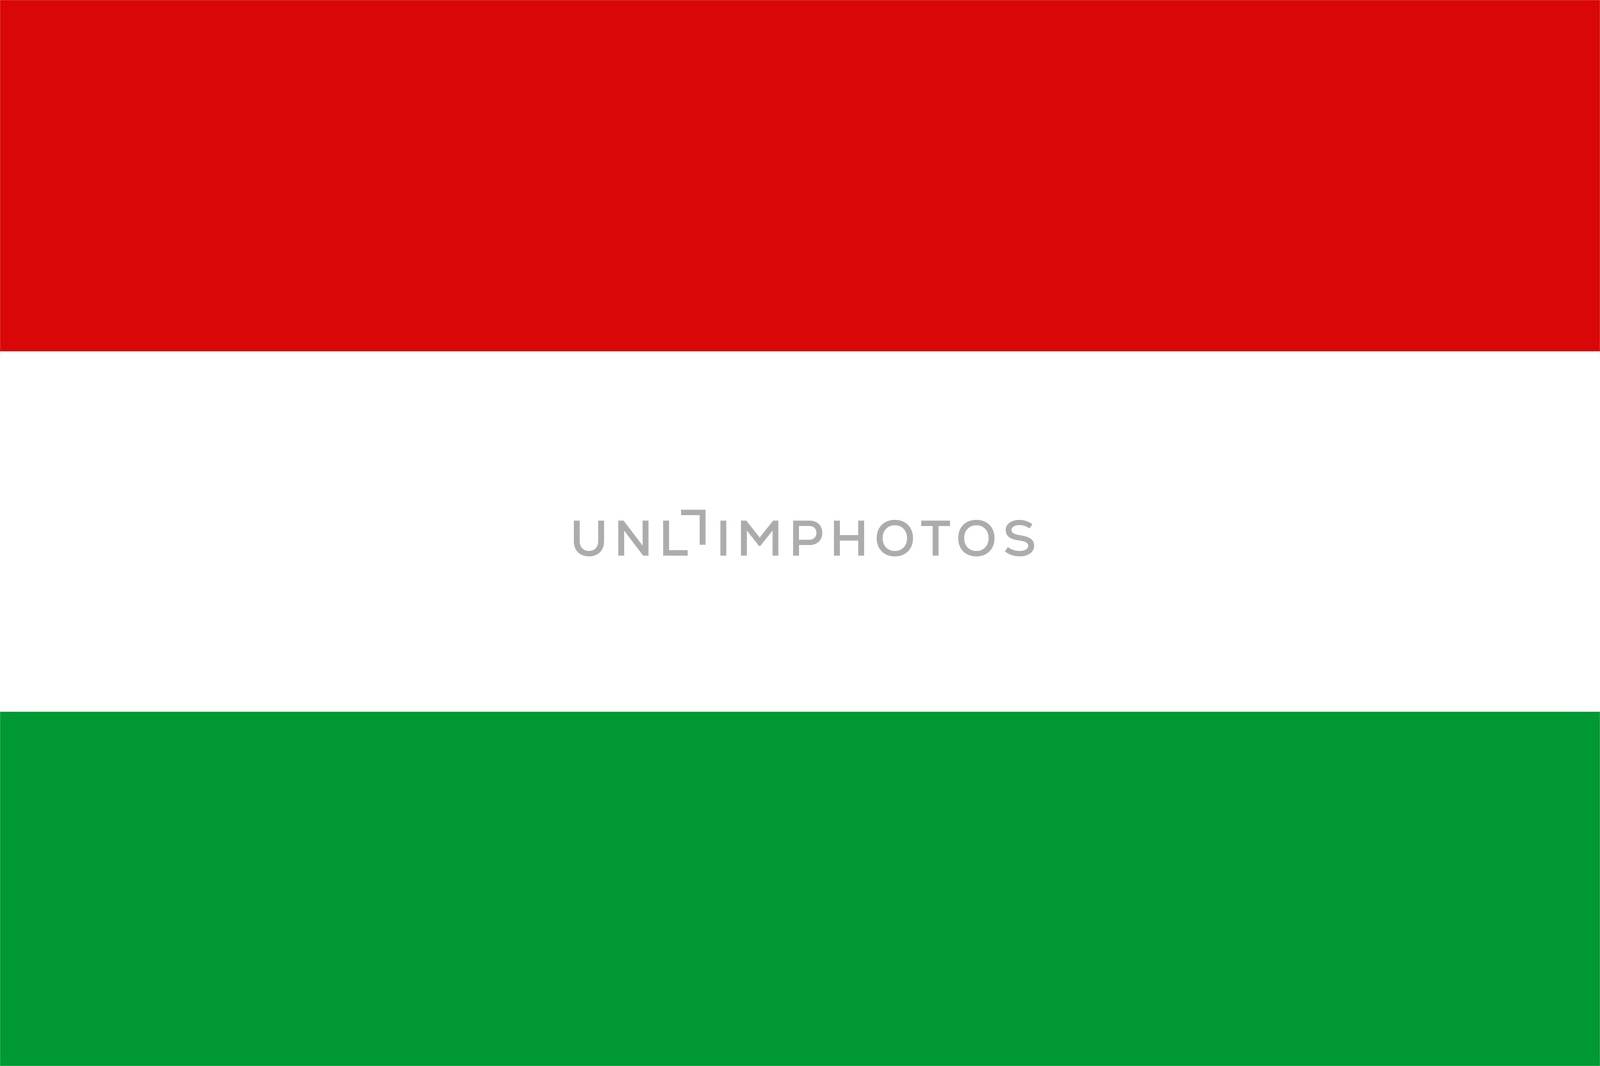 2D illustration of the flag of Hungary vector